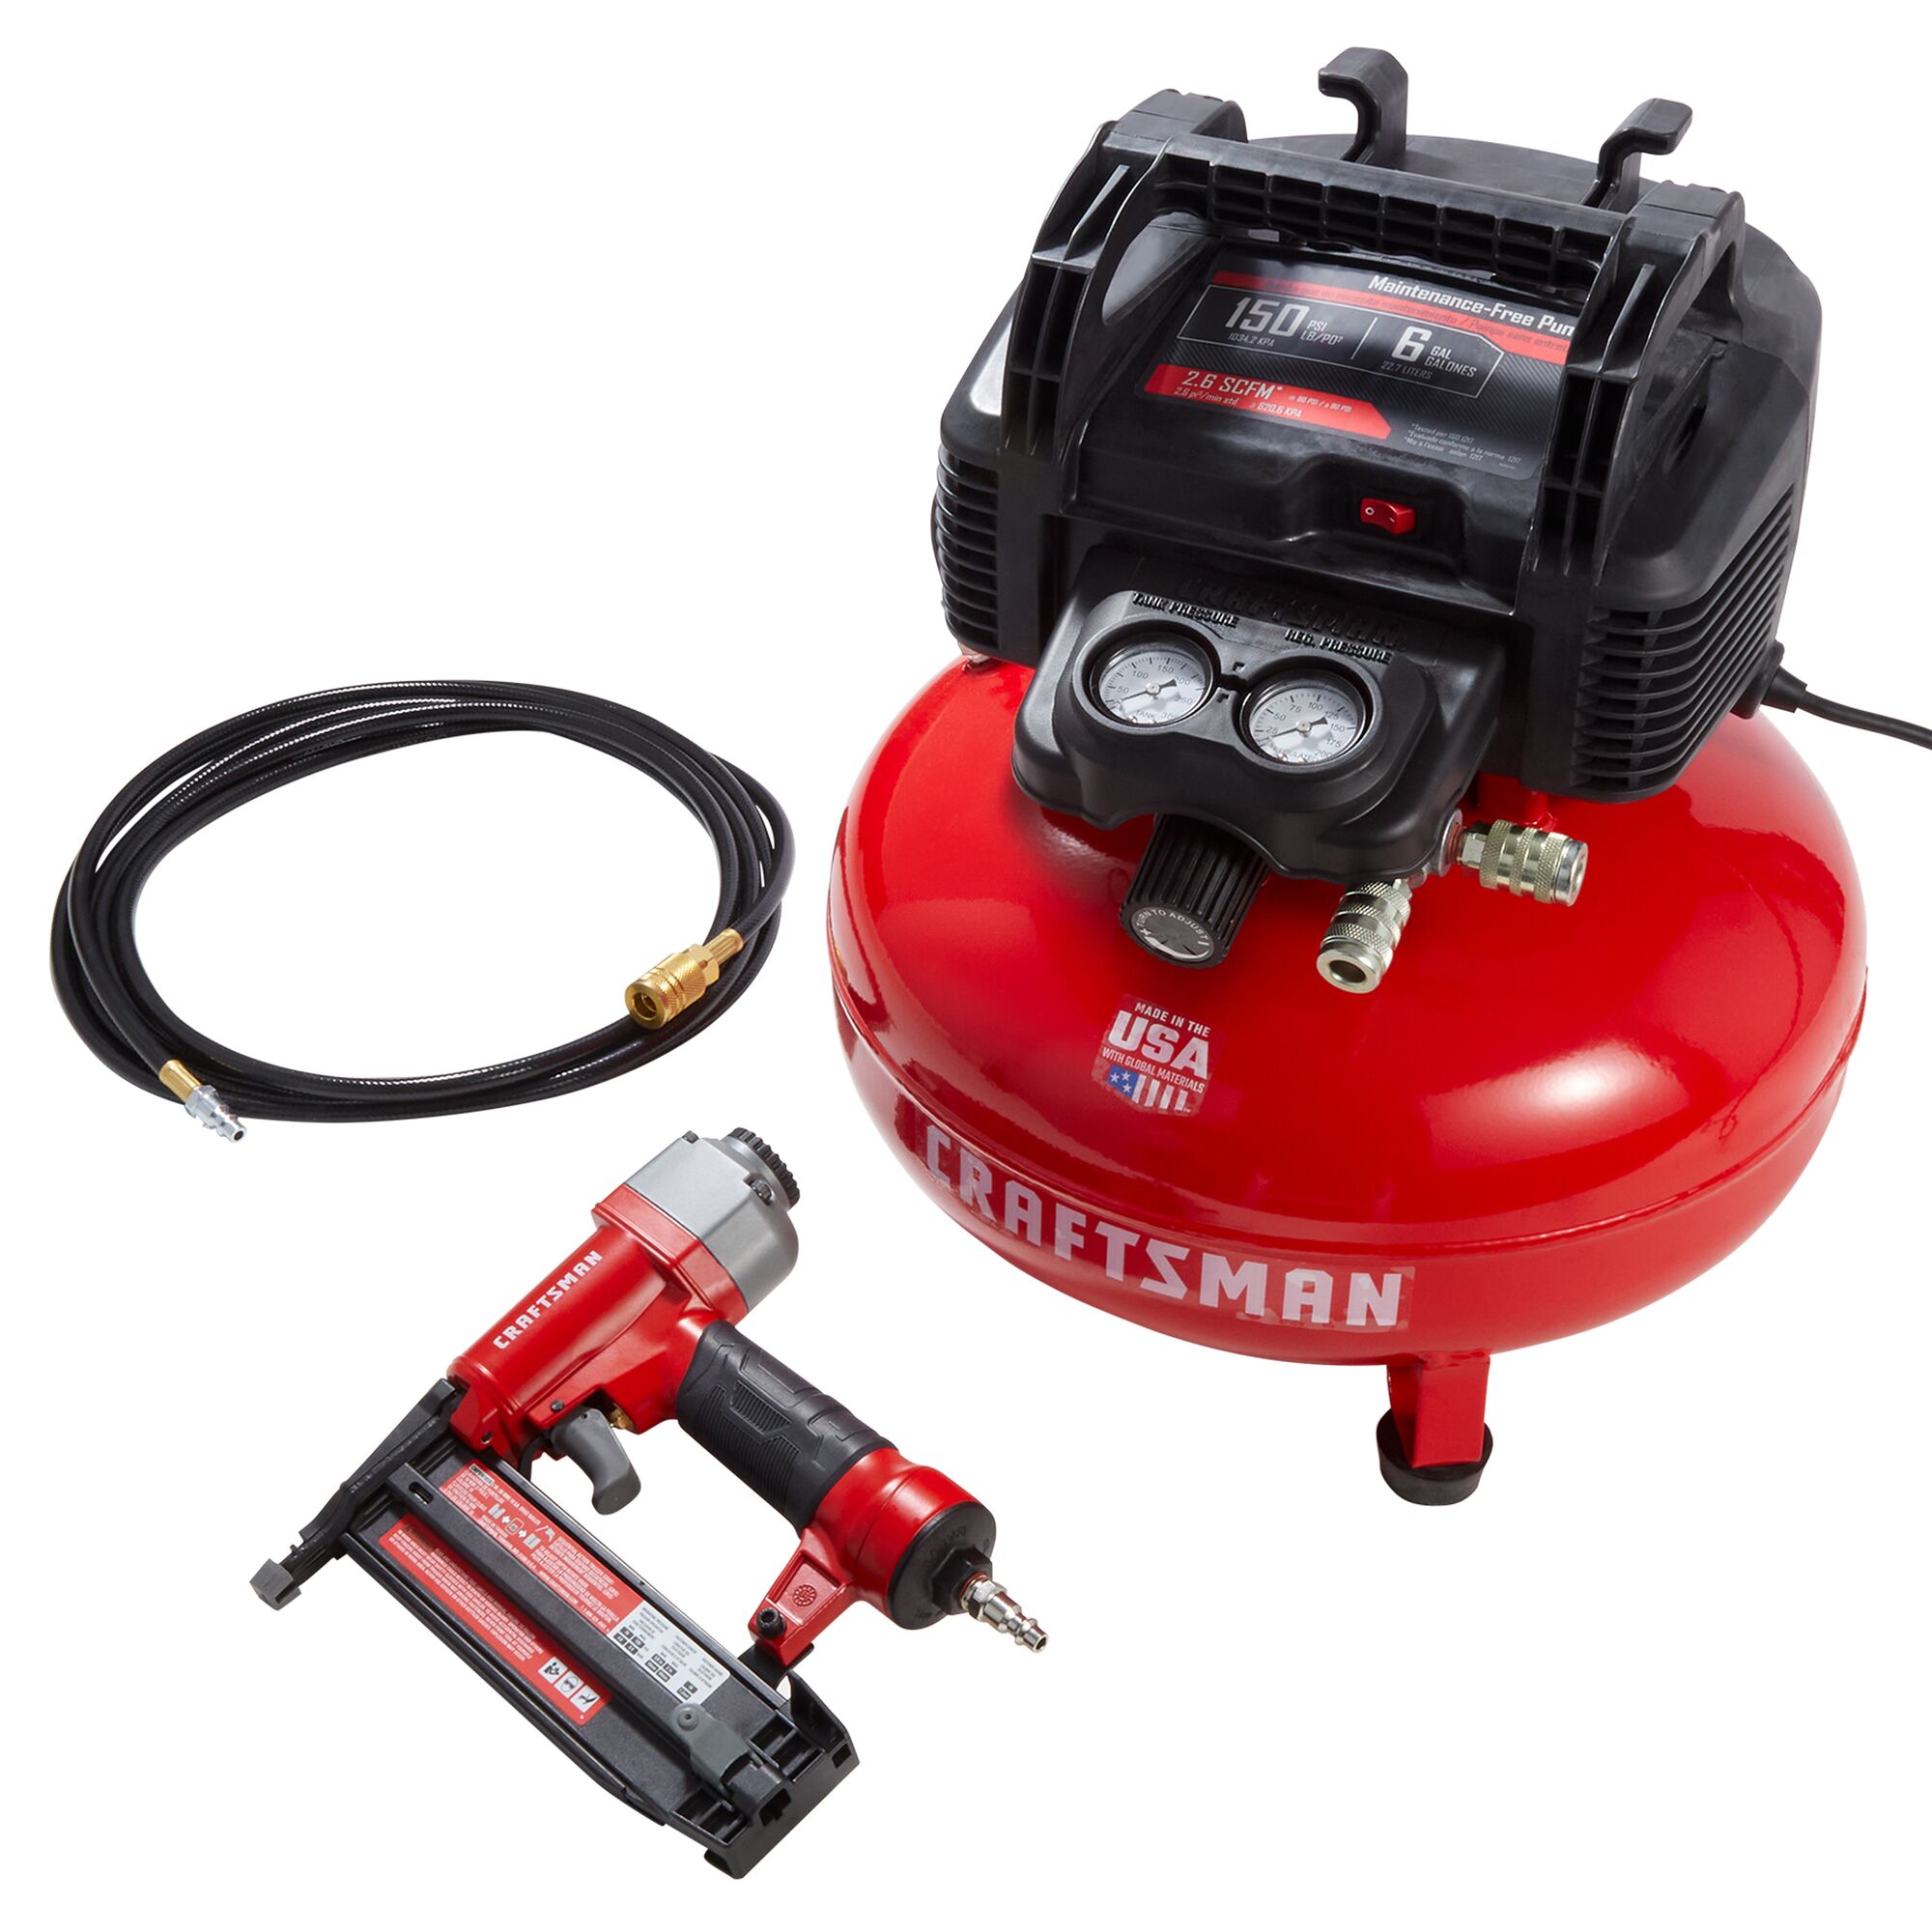 View of CRAFTSMAN Combo Kits: Power Tools and additional tools in the kit